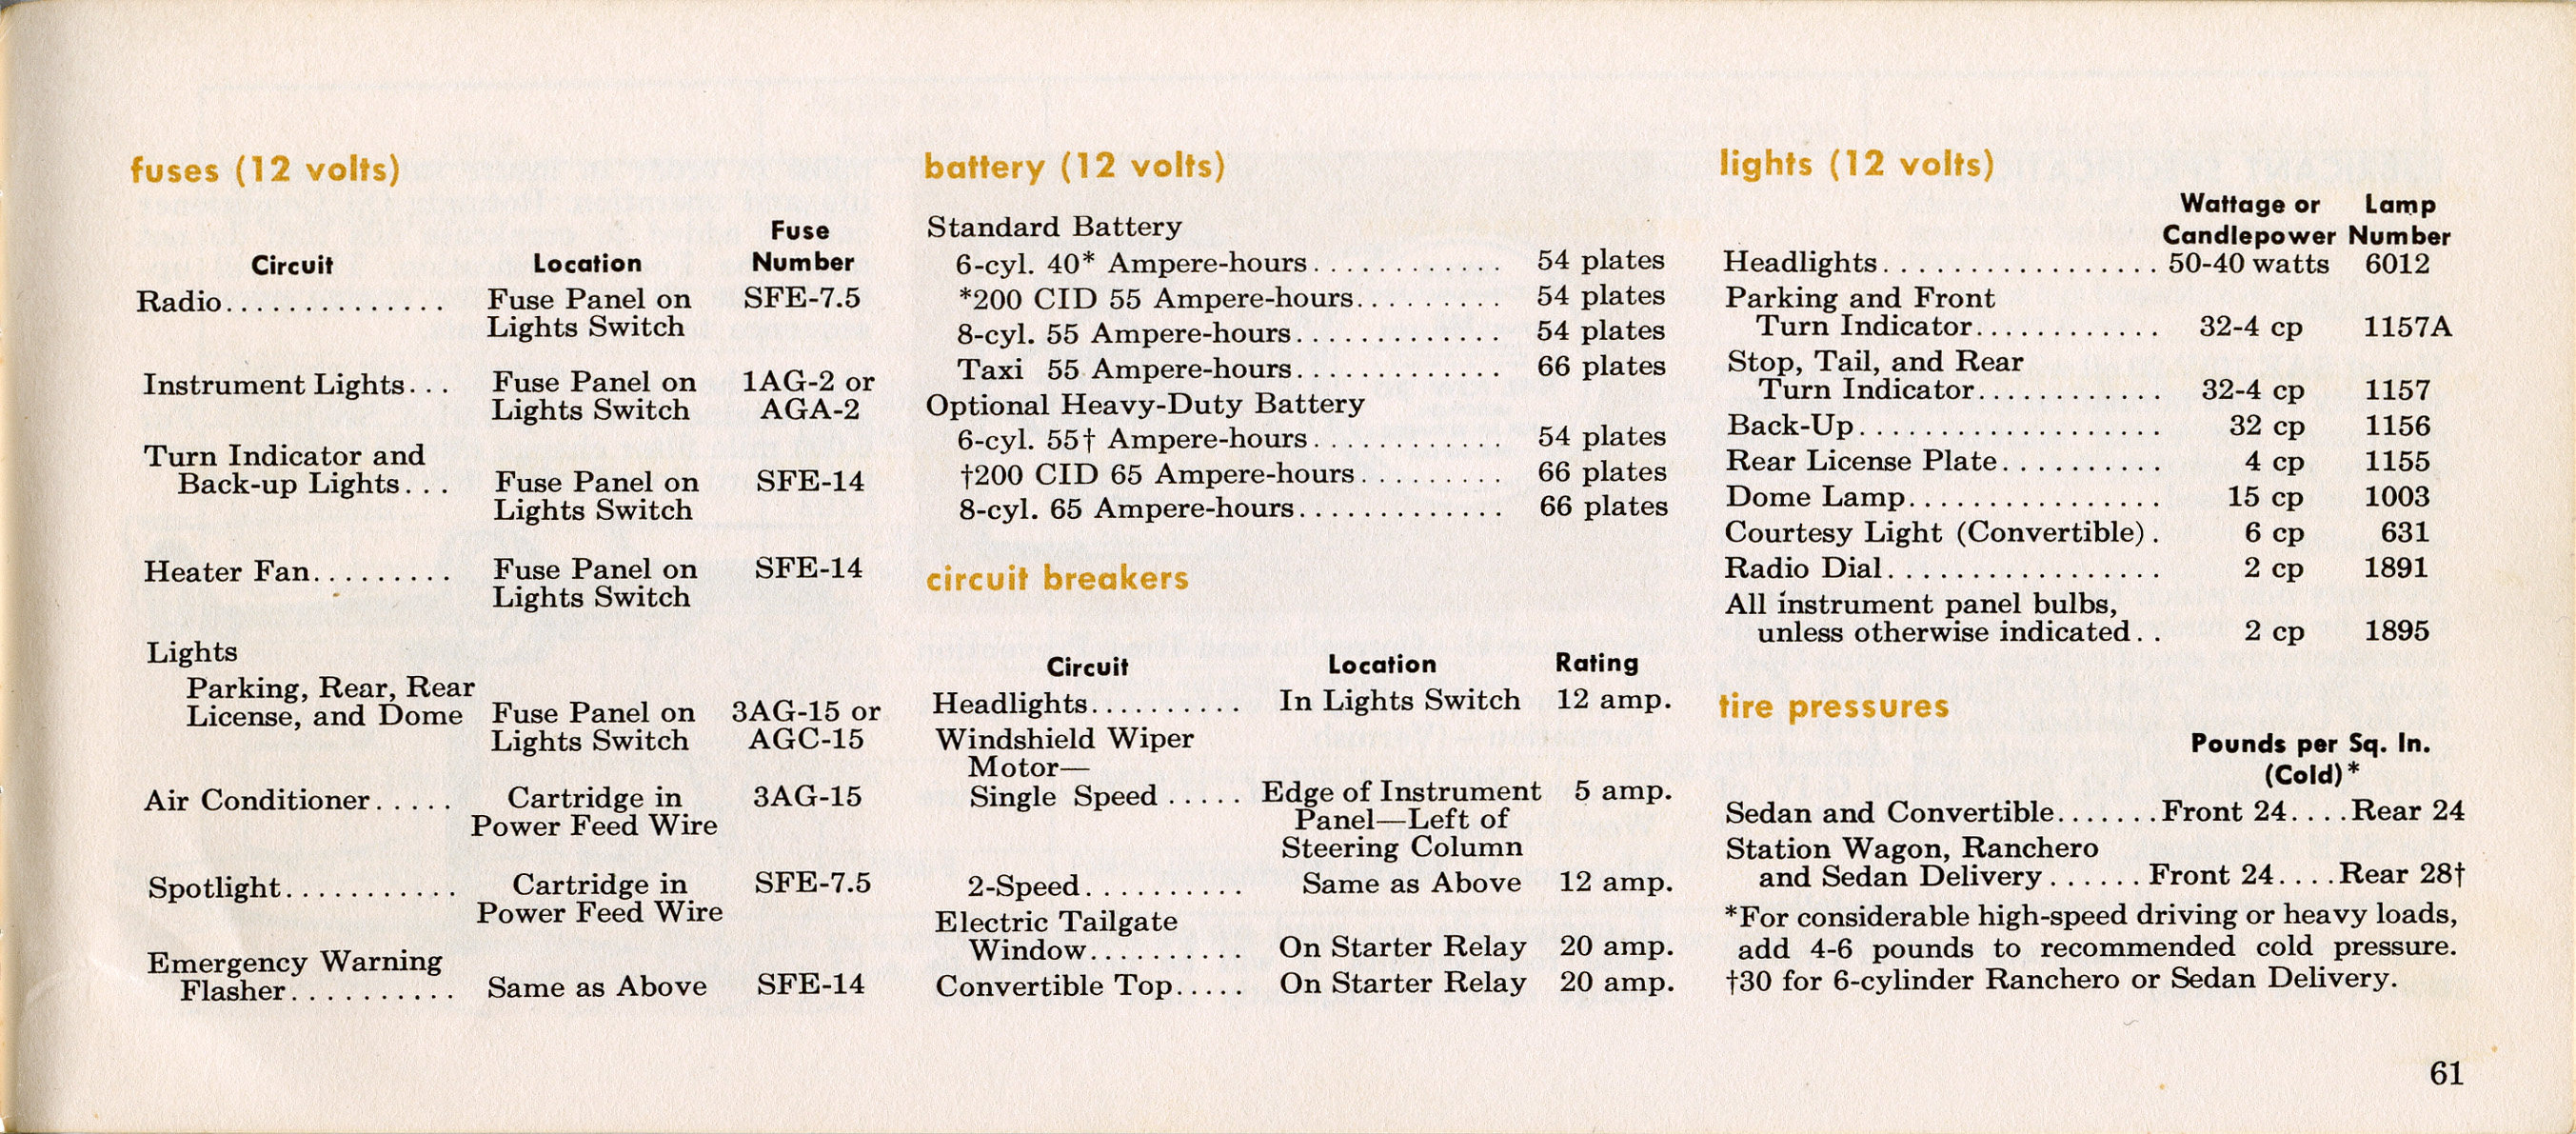 1964_Ford_Falcon_Owners_Manual-61